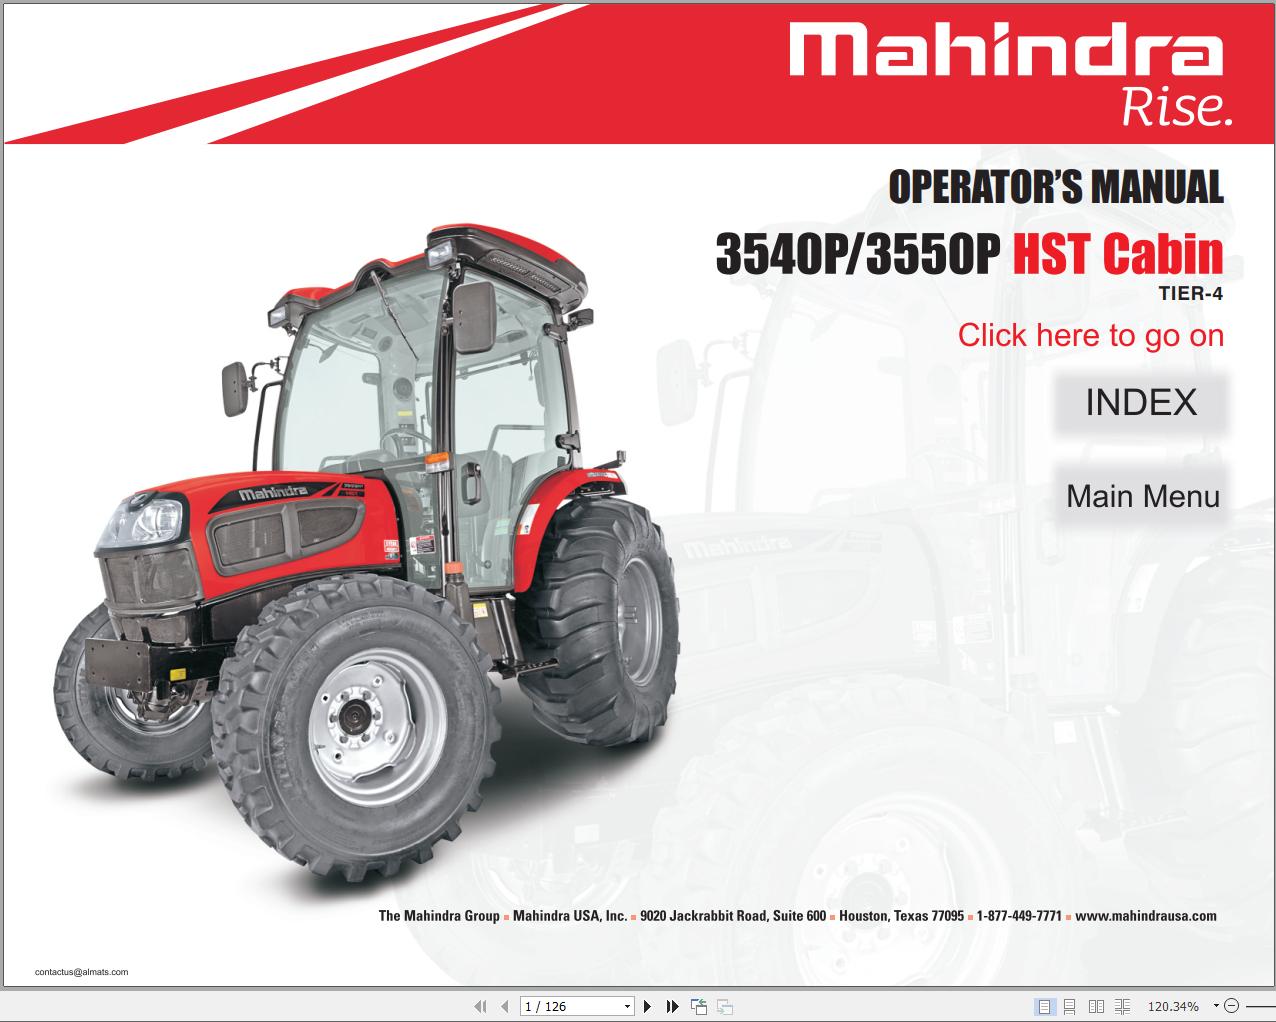 Mahindra Tractor 3540 3550 HST CABIN Full Operator Manual Fast Download